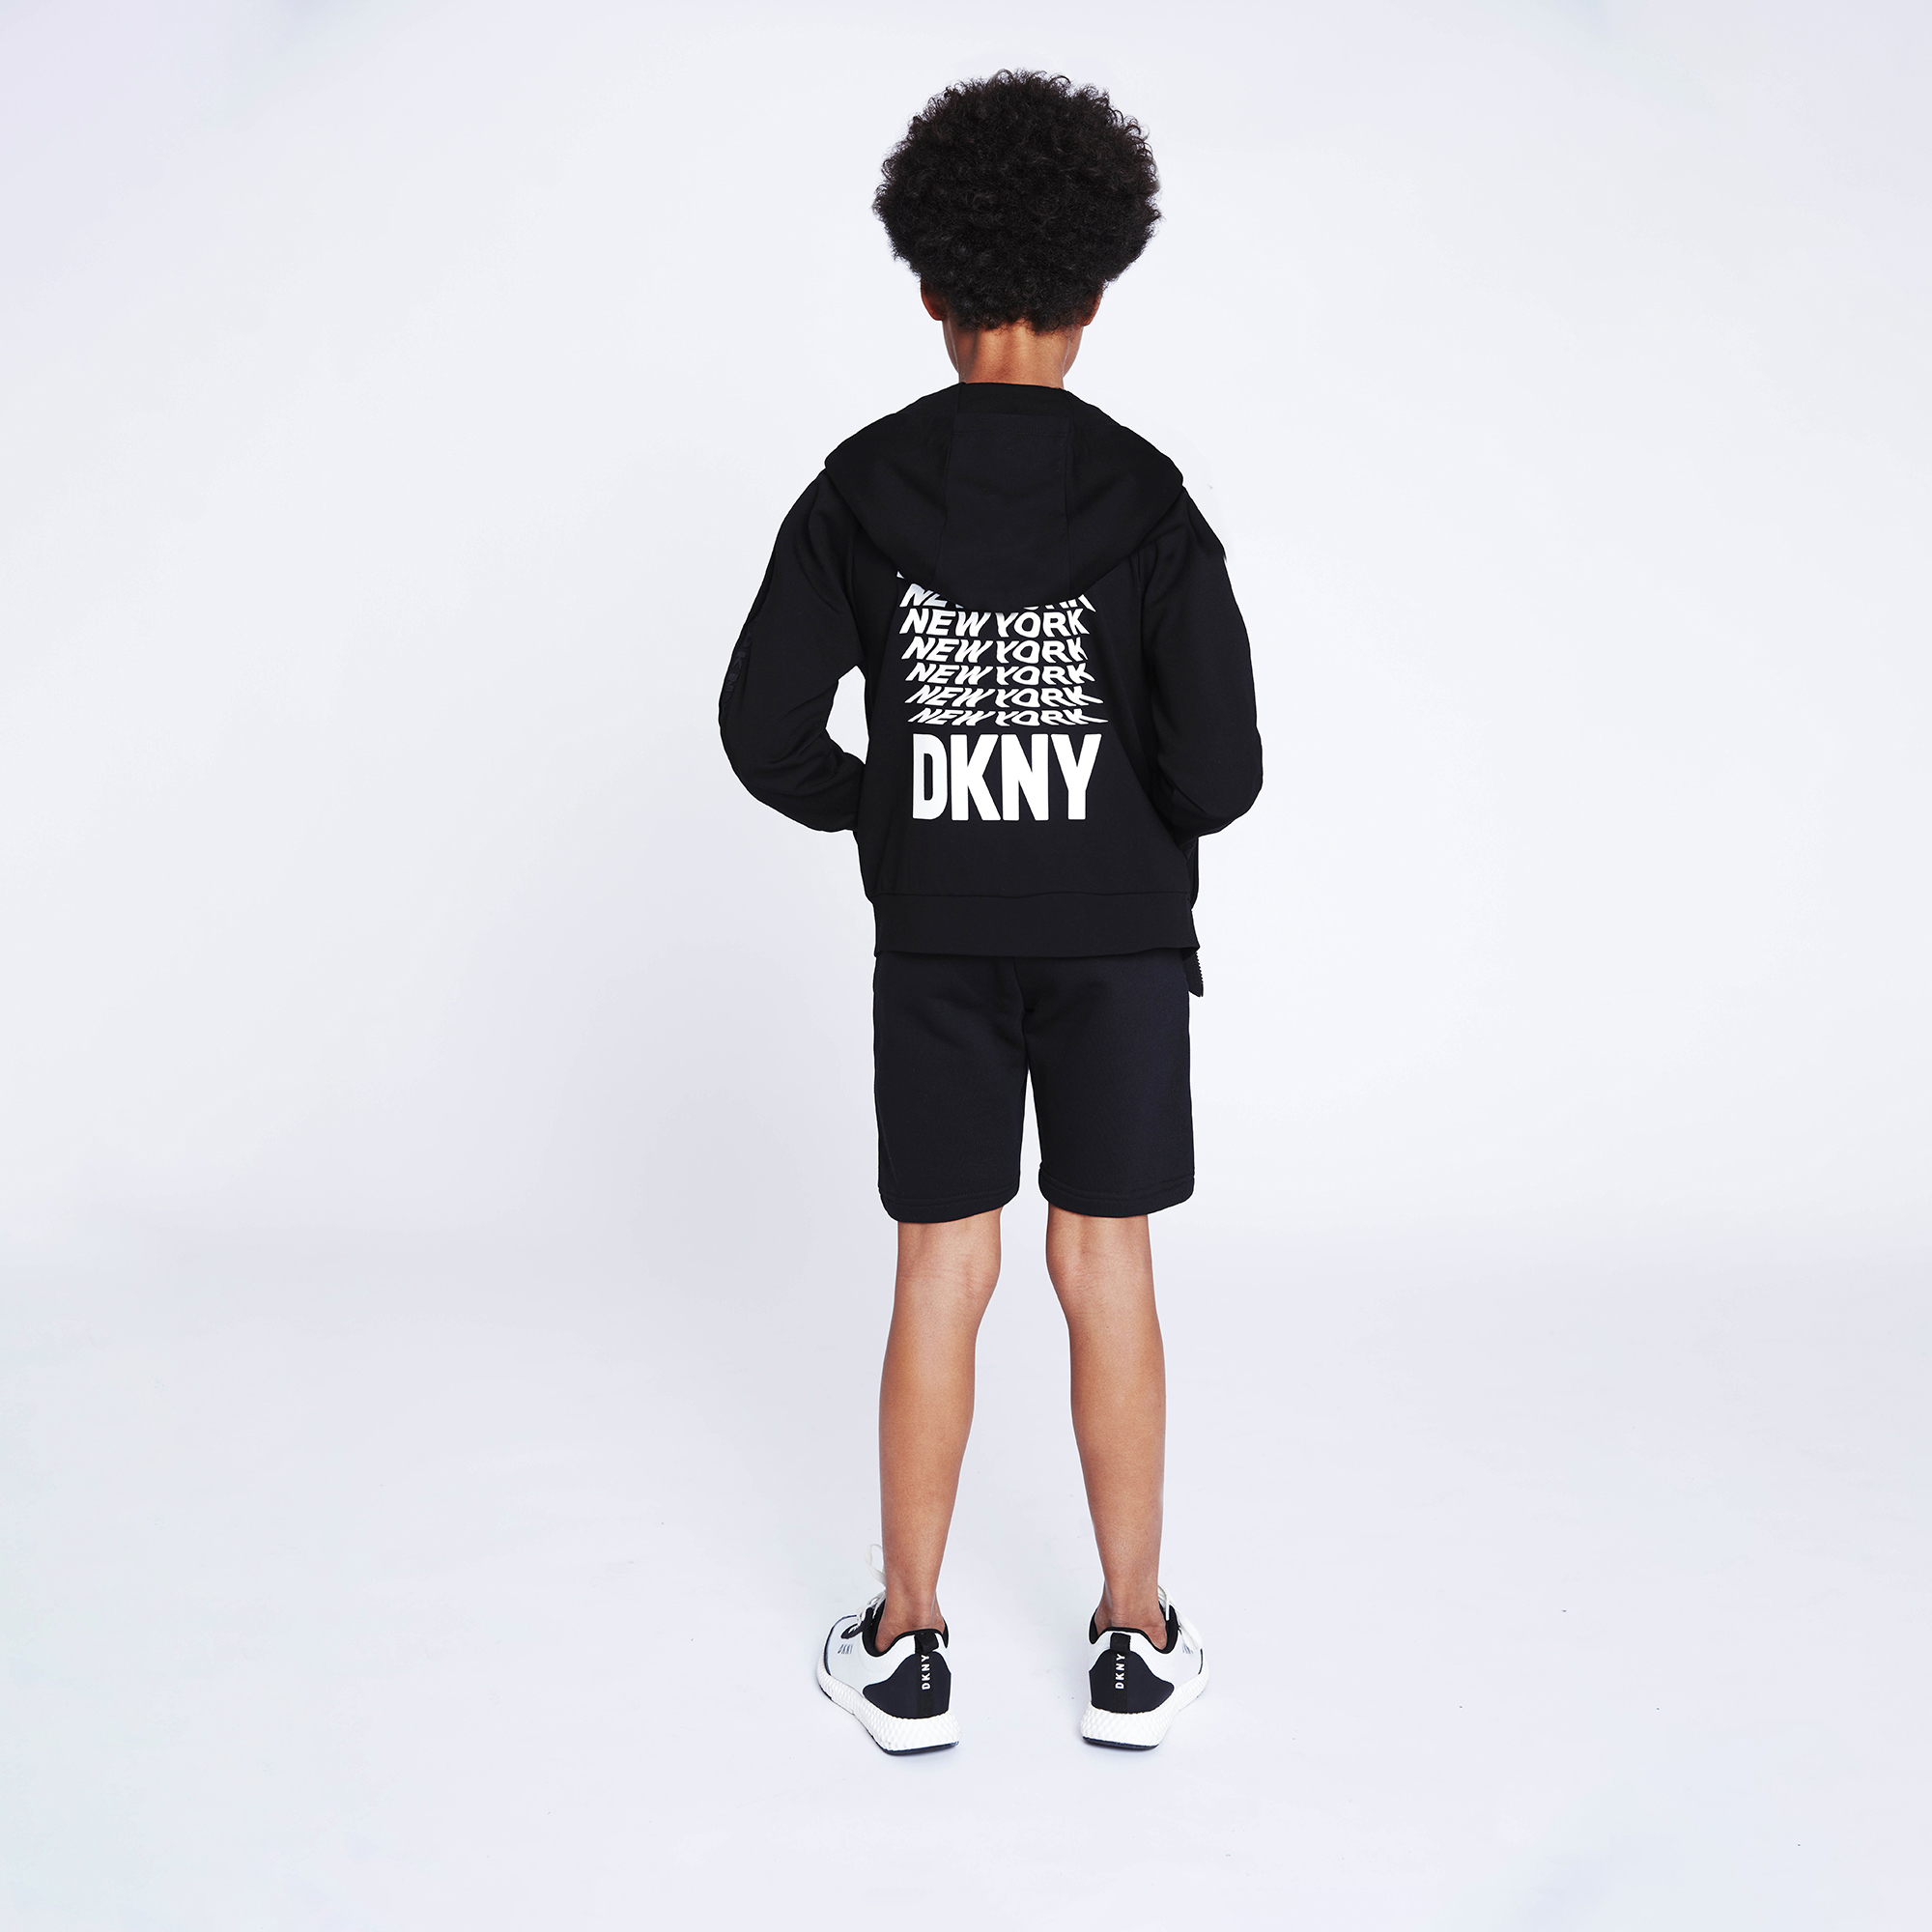 Unisex shorts with pockets DKNY for BOY